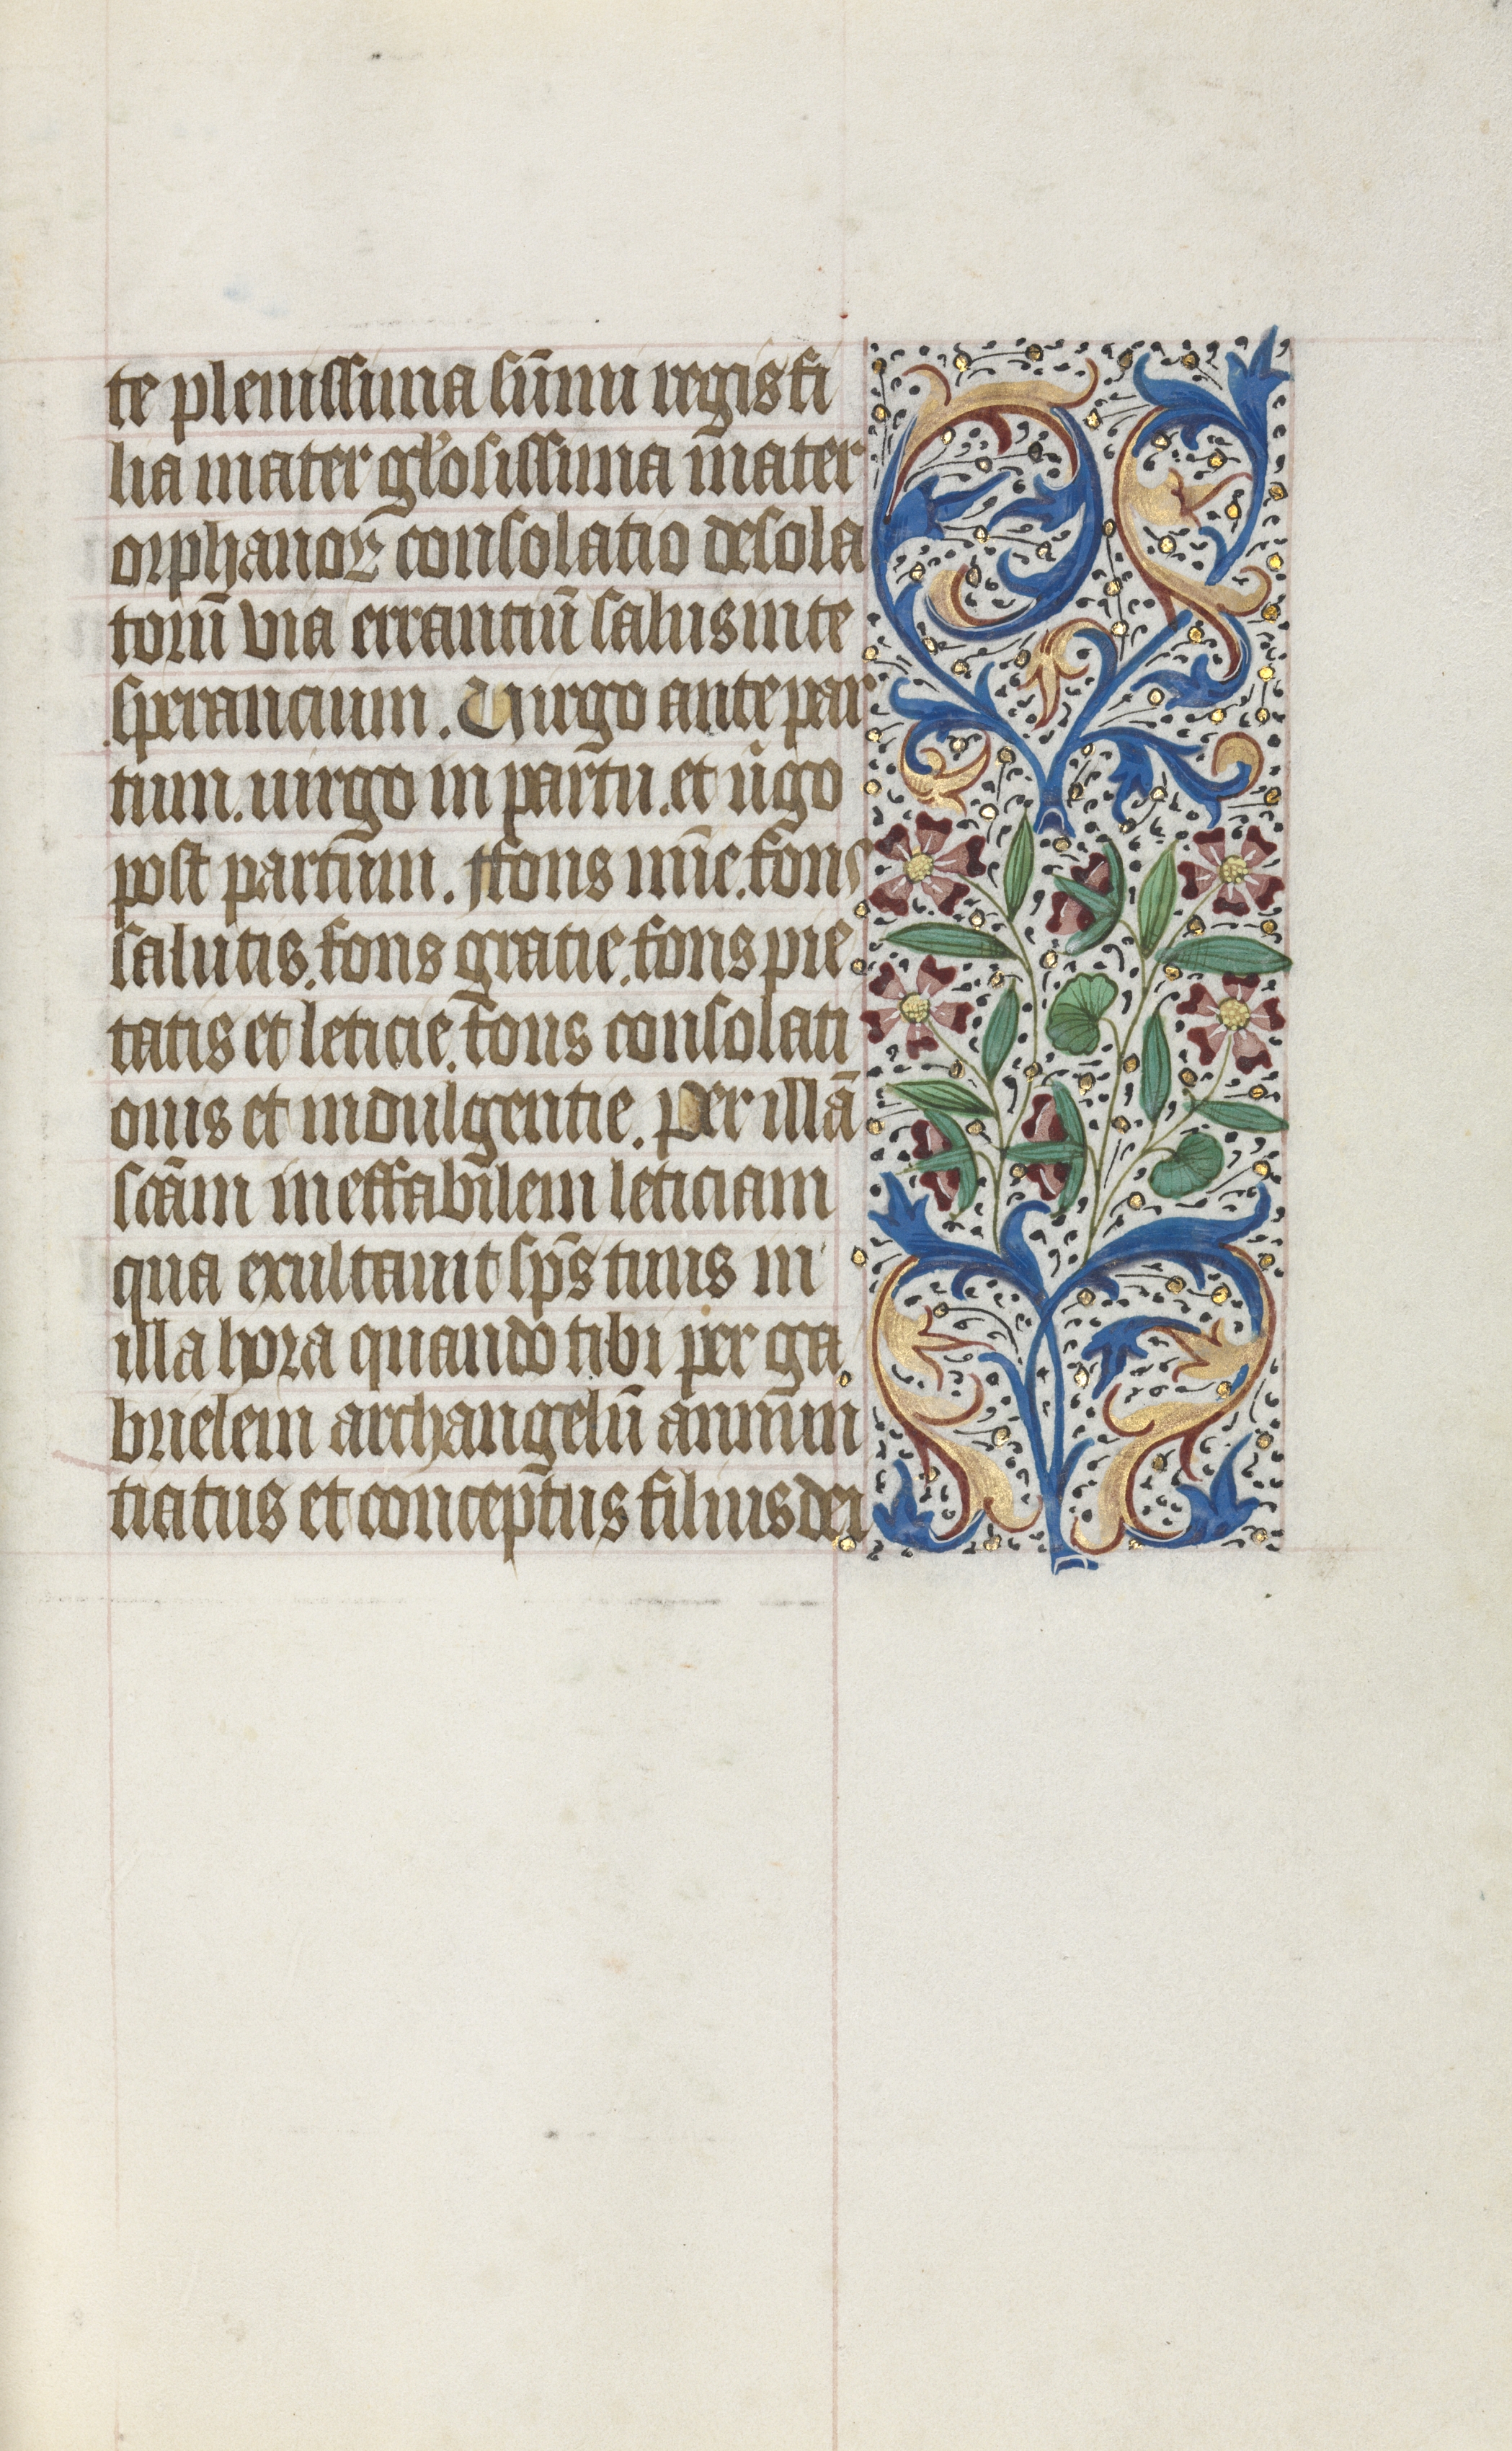 Book of Hours (Use of Rouen): fol. 19r